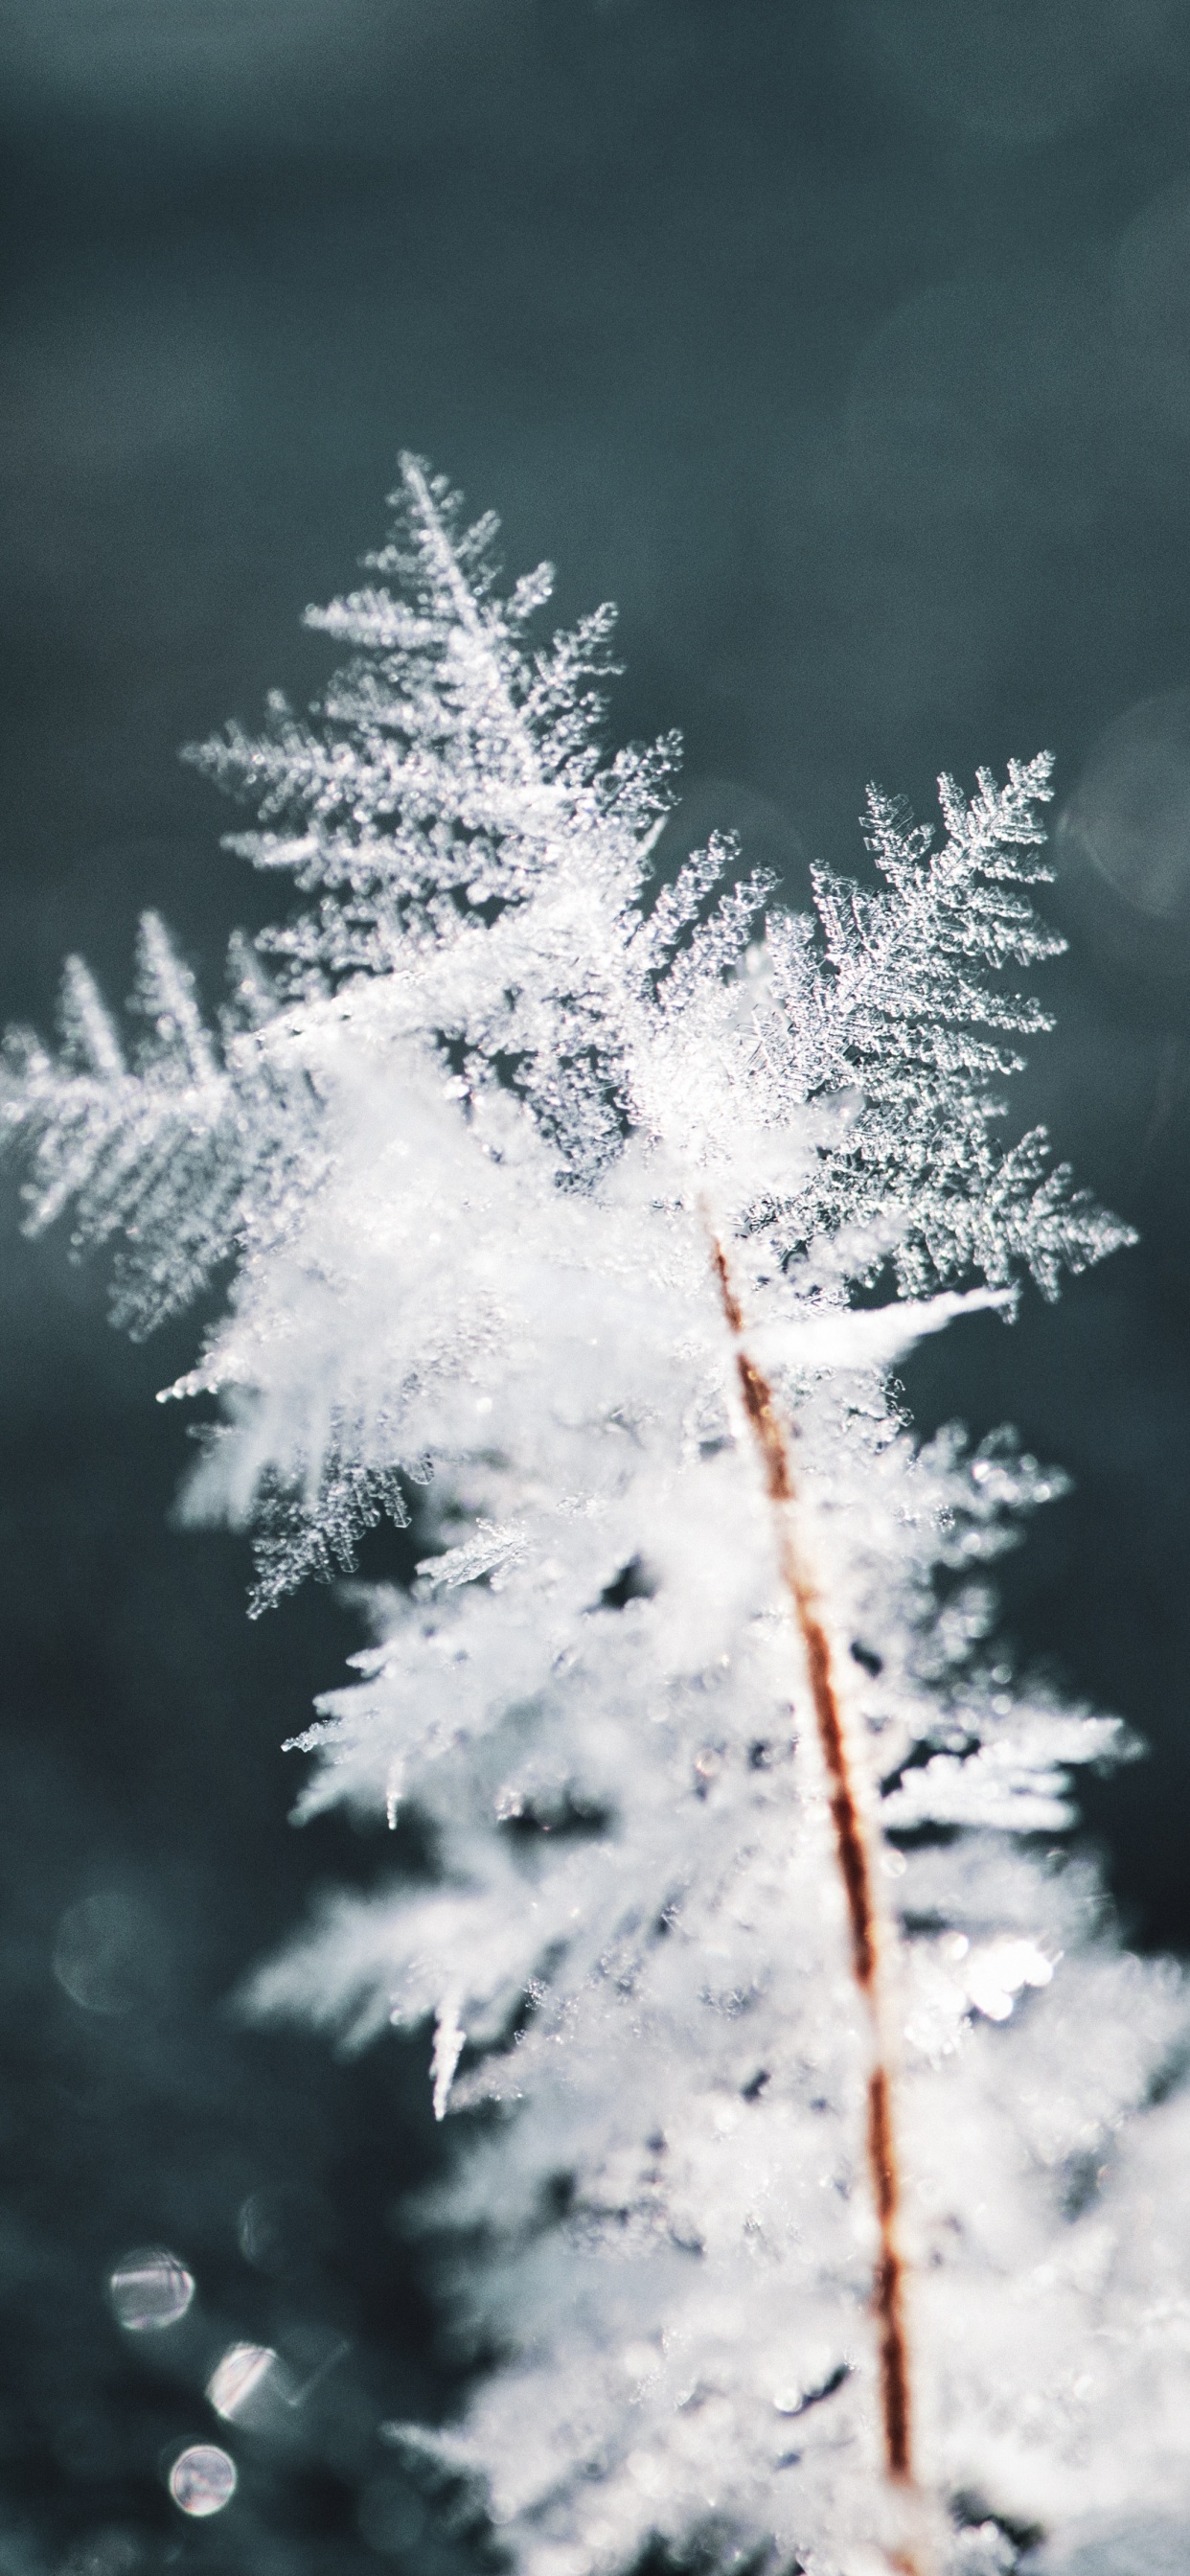 Winter, Snow, Frost, Freezing, Branch. Wallpaper in 1242x2688 Resolution